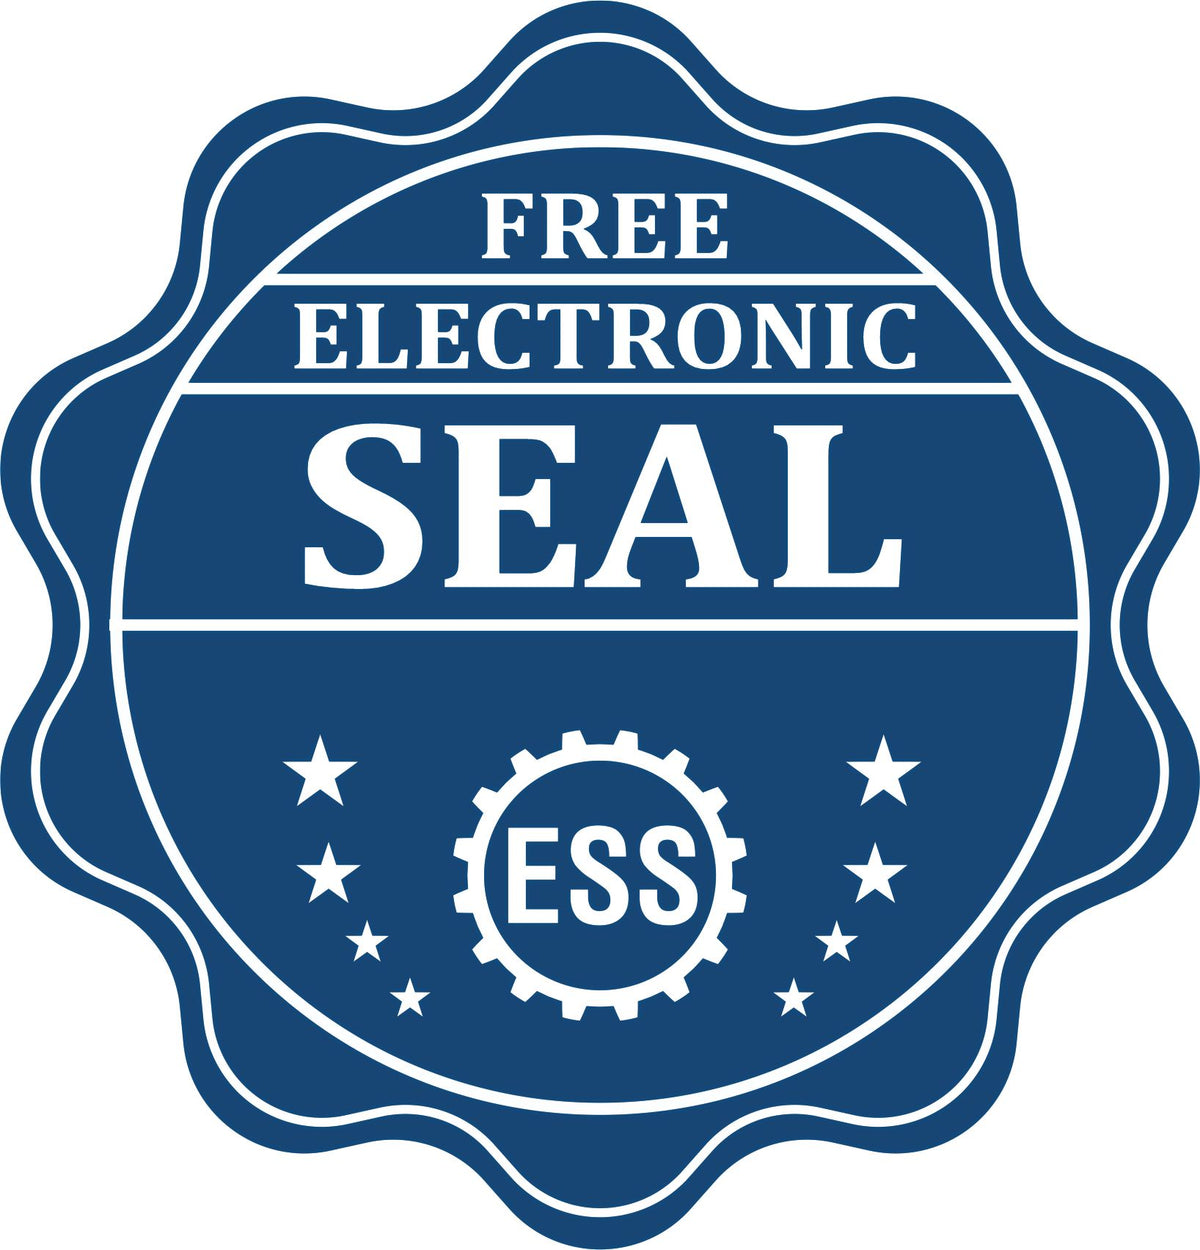 A badge showing a free electronic seal for the Heavy-Duty Iowa Rectangular Notary Stamp with stars and the ESS gear on the emblem.